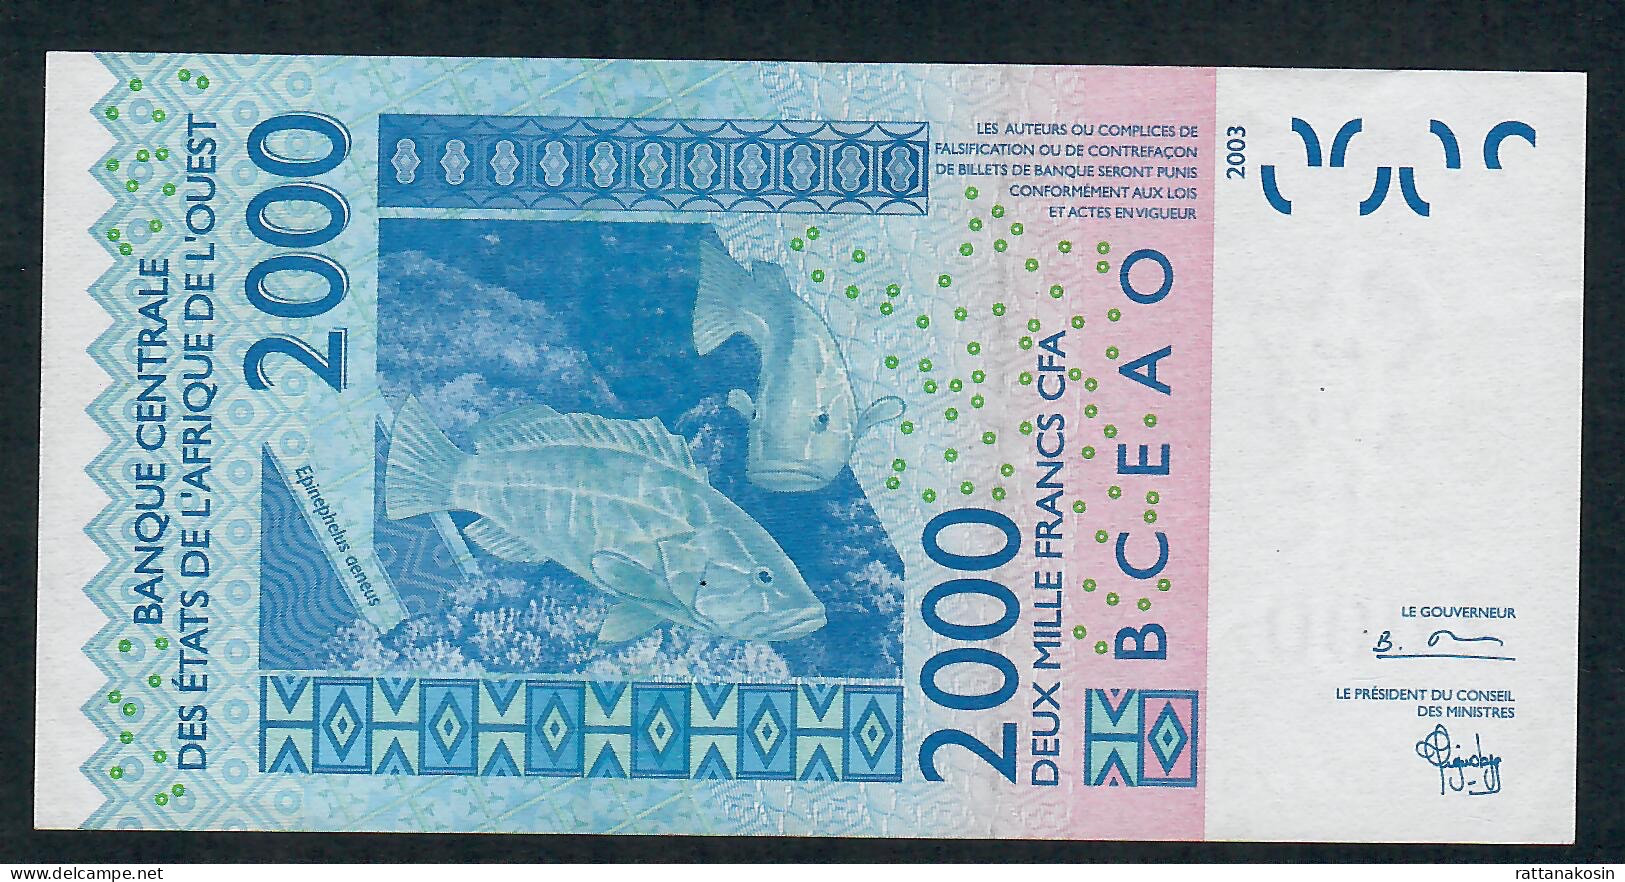 W.A.S. NIGER P616Hb 2000 FRANCS (20)04 2004 Signature 32   XF  NO P.h. - West African States